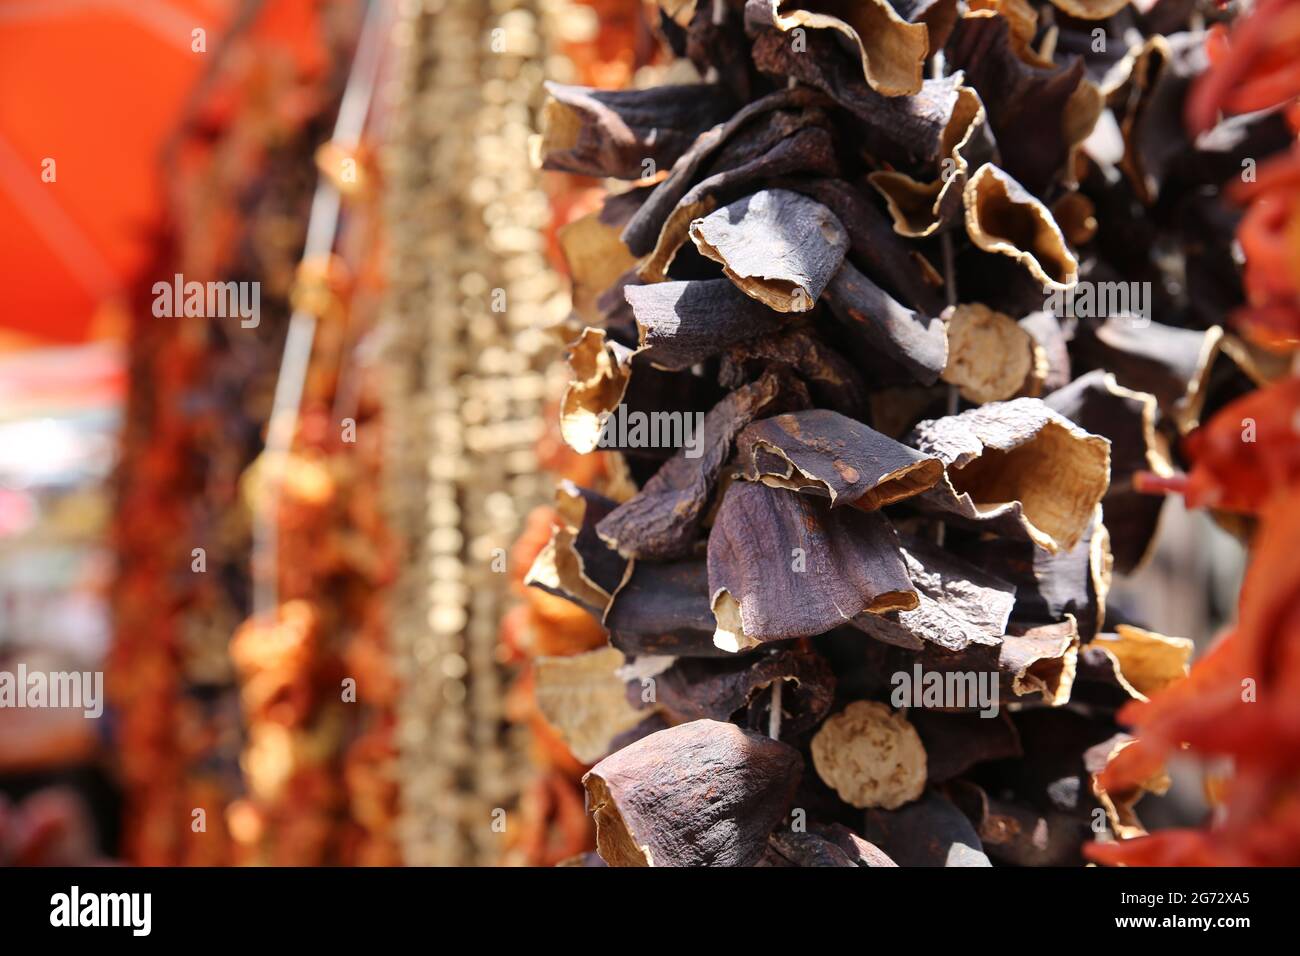 Close up of dried eggplants hanging on a string for sale outdoors, under sunlight. Stock Photo